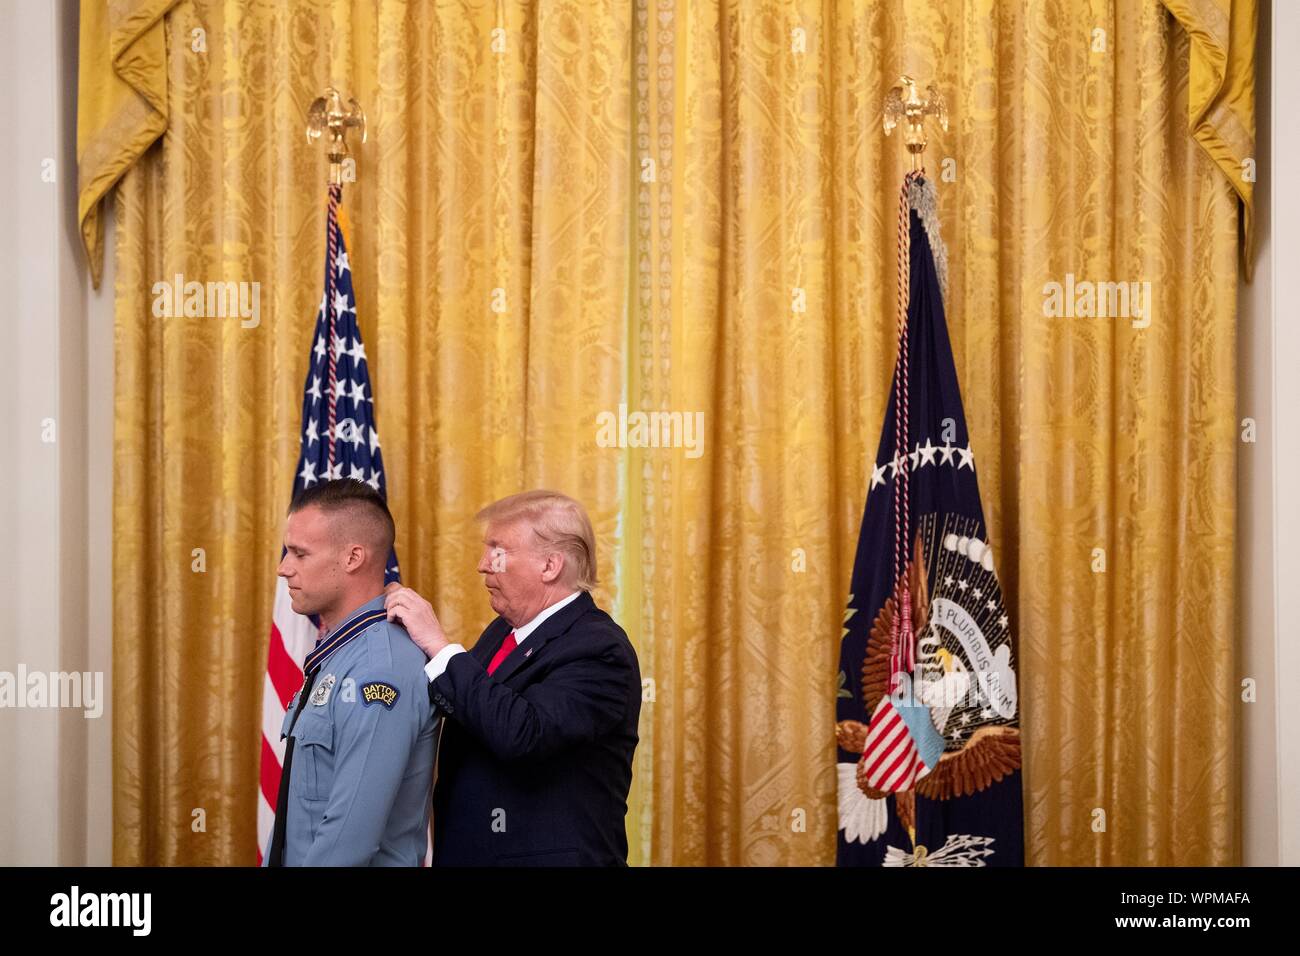 Washington, United States. 09th Sep, 2019. President Donald Trump awards Dayton Police Officer Vincent Carter the Public Safety Officer Medal of Valor, during a ceremony in the East Room at the White House in Washington, DC on Monday, September 9, 2019. Trump recognized the six Dayton officers who stoped a mass shooting on August 4th and honored 5 civilians who helped during a mass shooting at a Walmart in El Paso a day before. Photo by Kevin Dietsch/UPI Credit: UPI/Alamy Live News Stock Photo